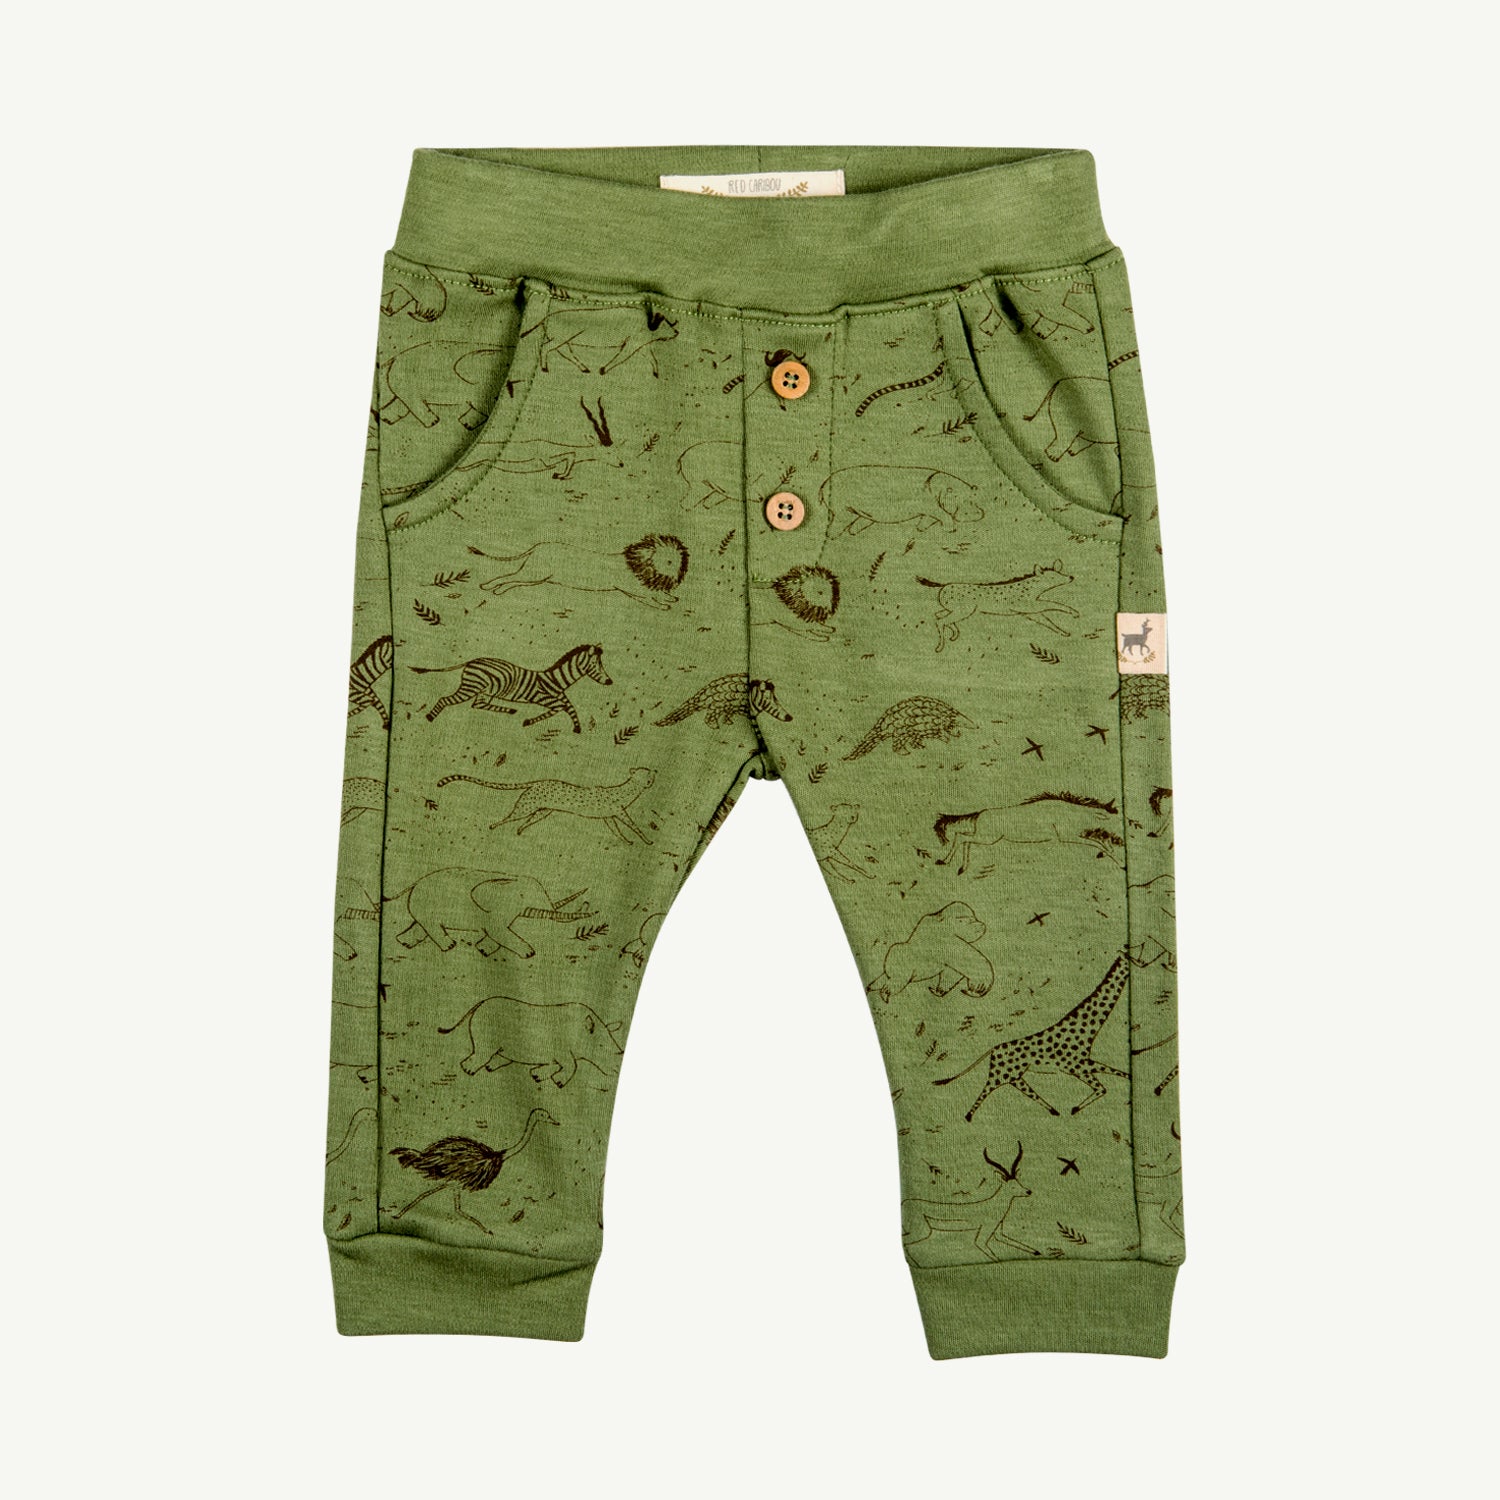 'the story' vineyard green buttons pants